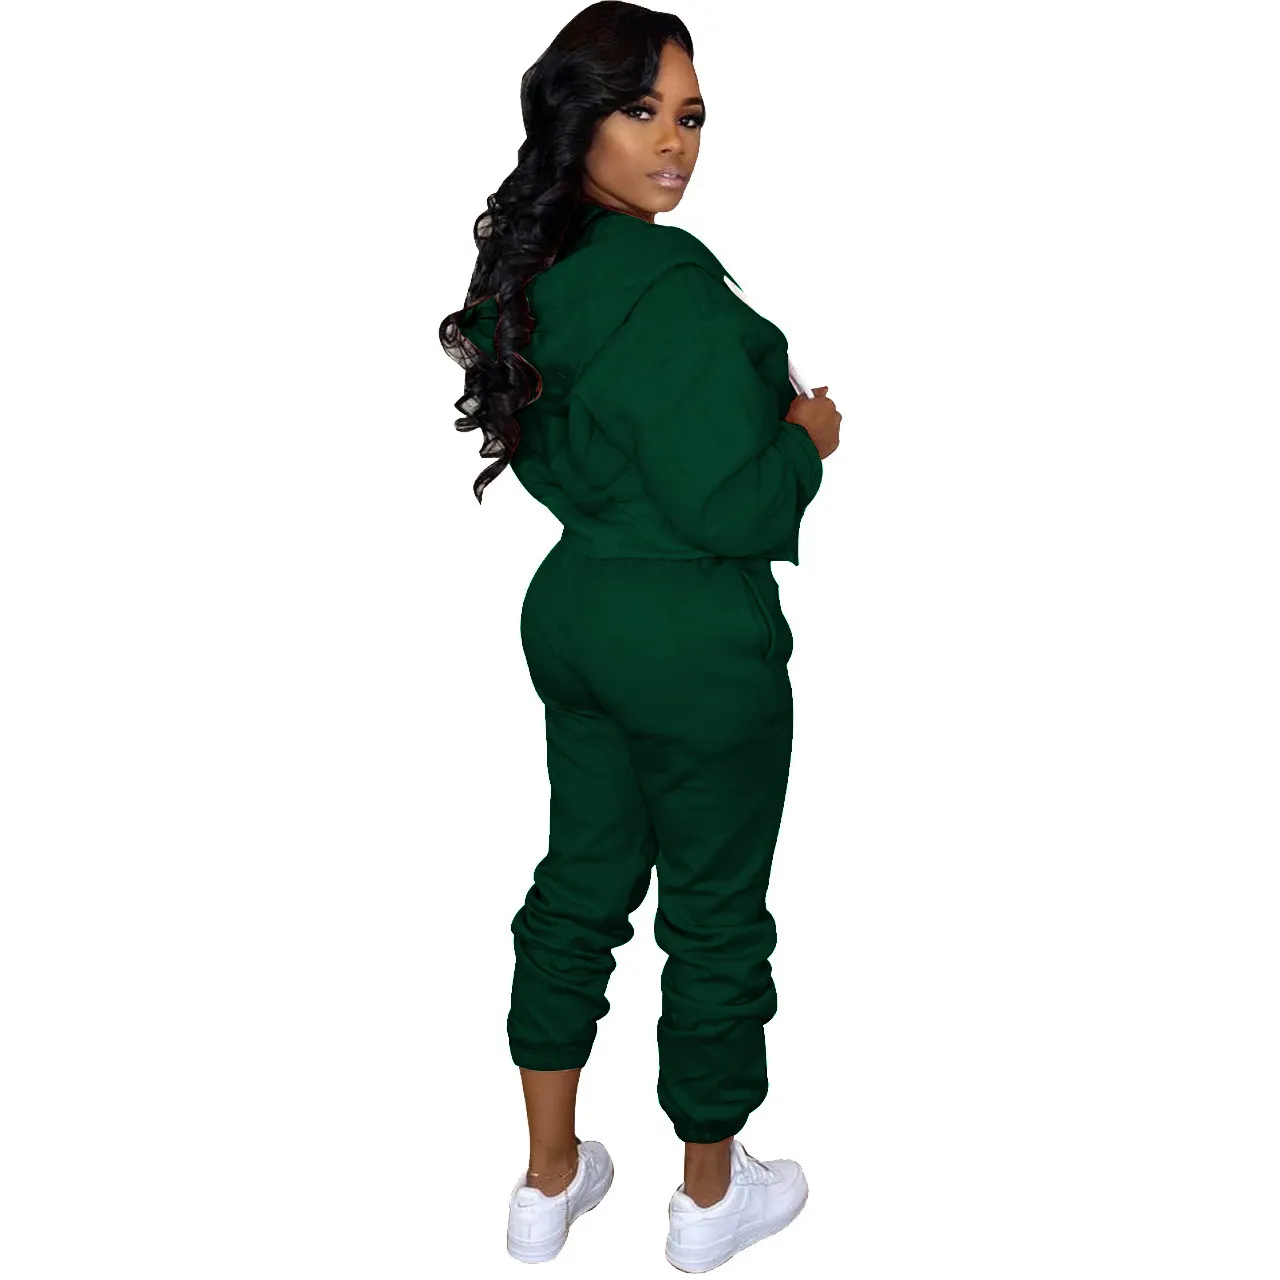 Supper Quality 2024 Sweatsuit for Women 2 Piece Warm Thick Fur Lining Fleece Zip Up Hoodie and Matching Long Sweatpants